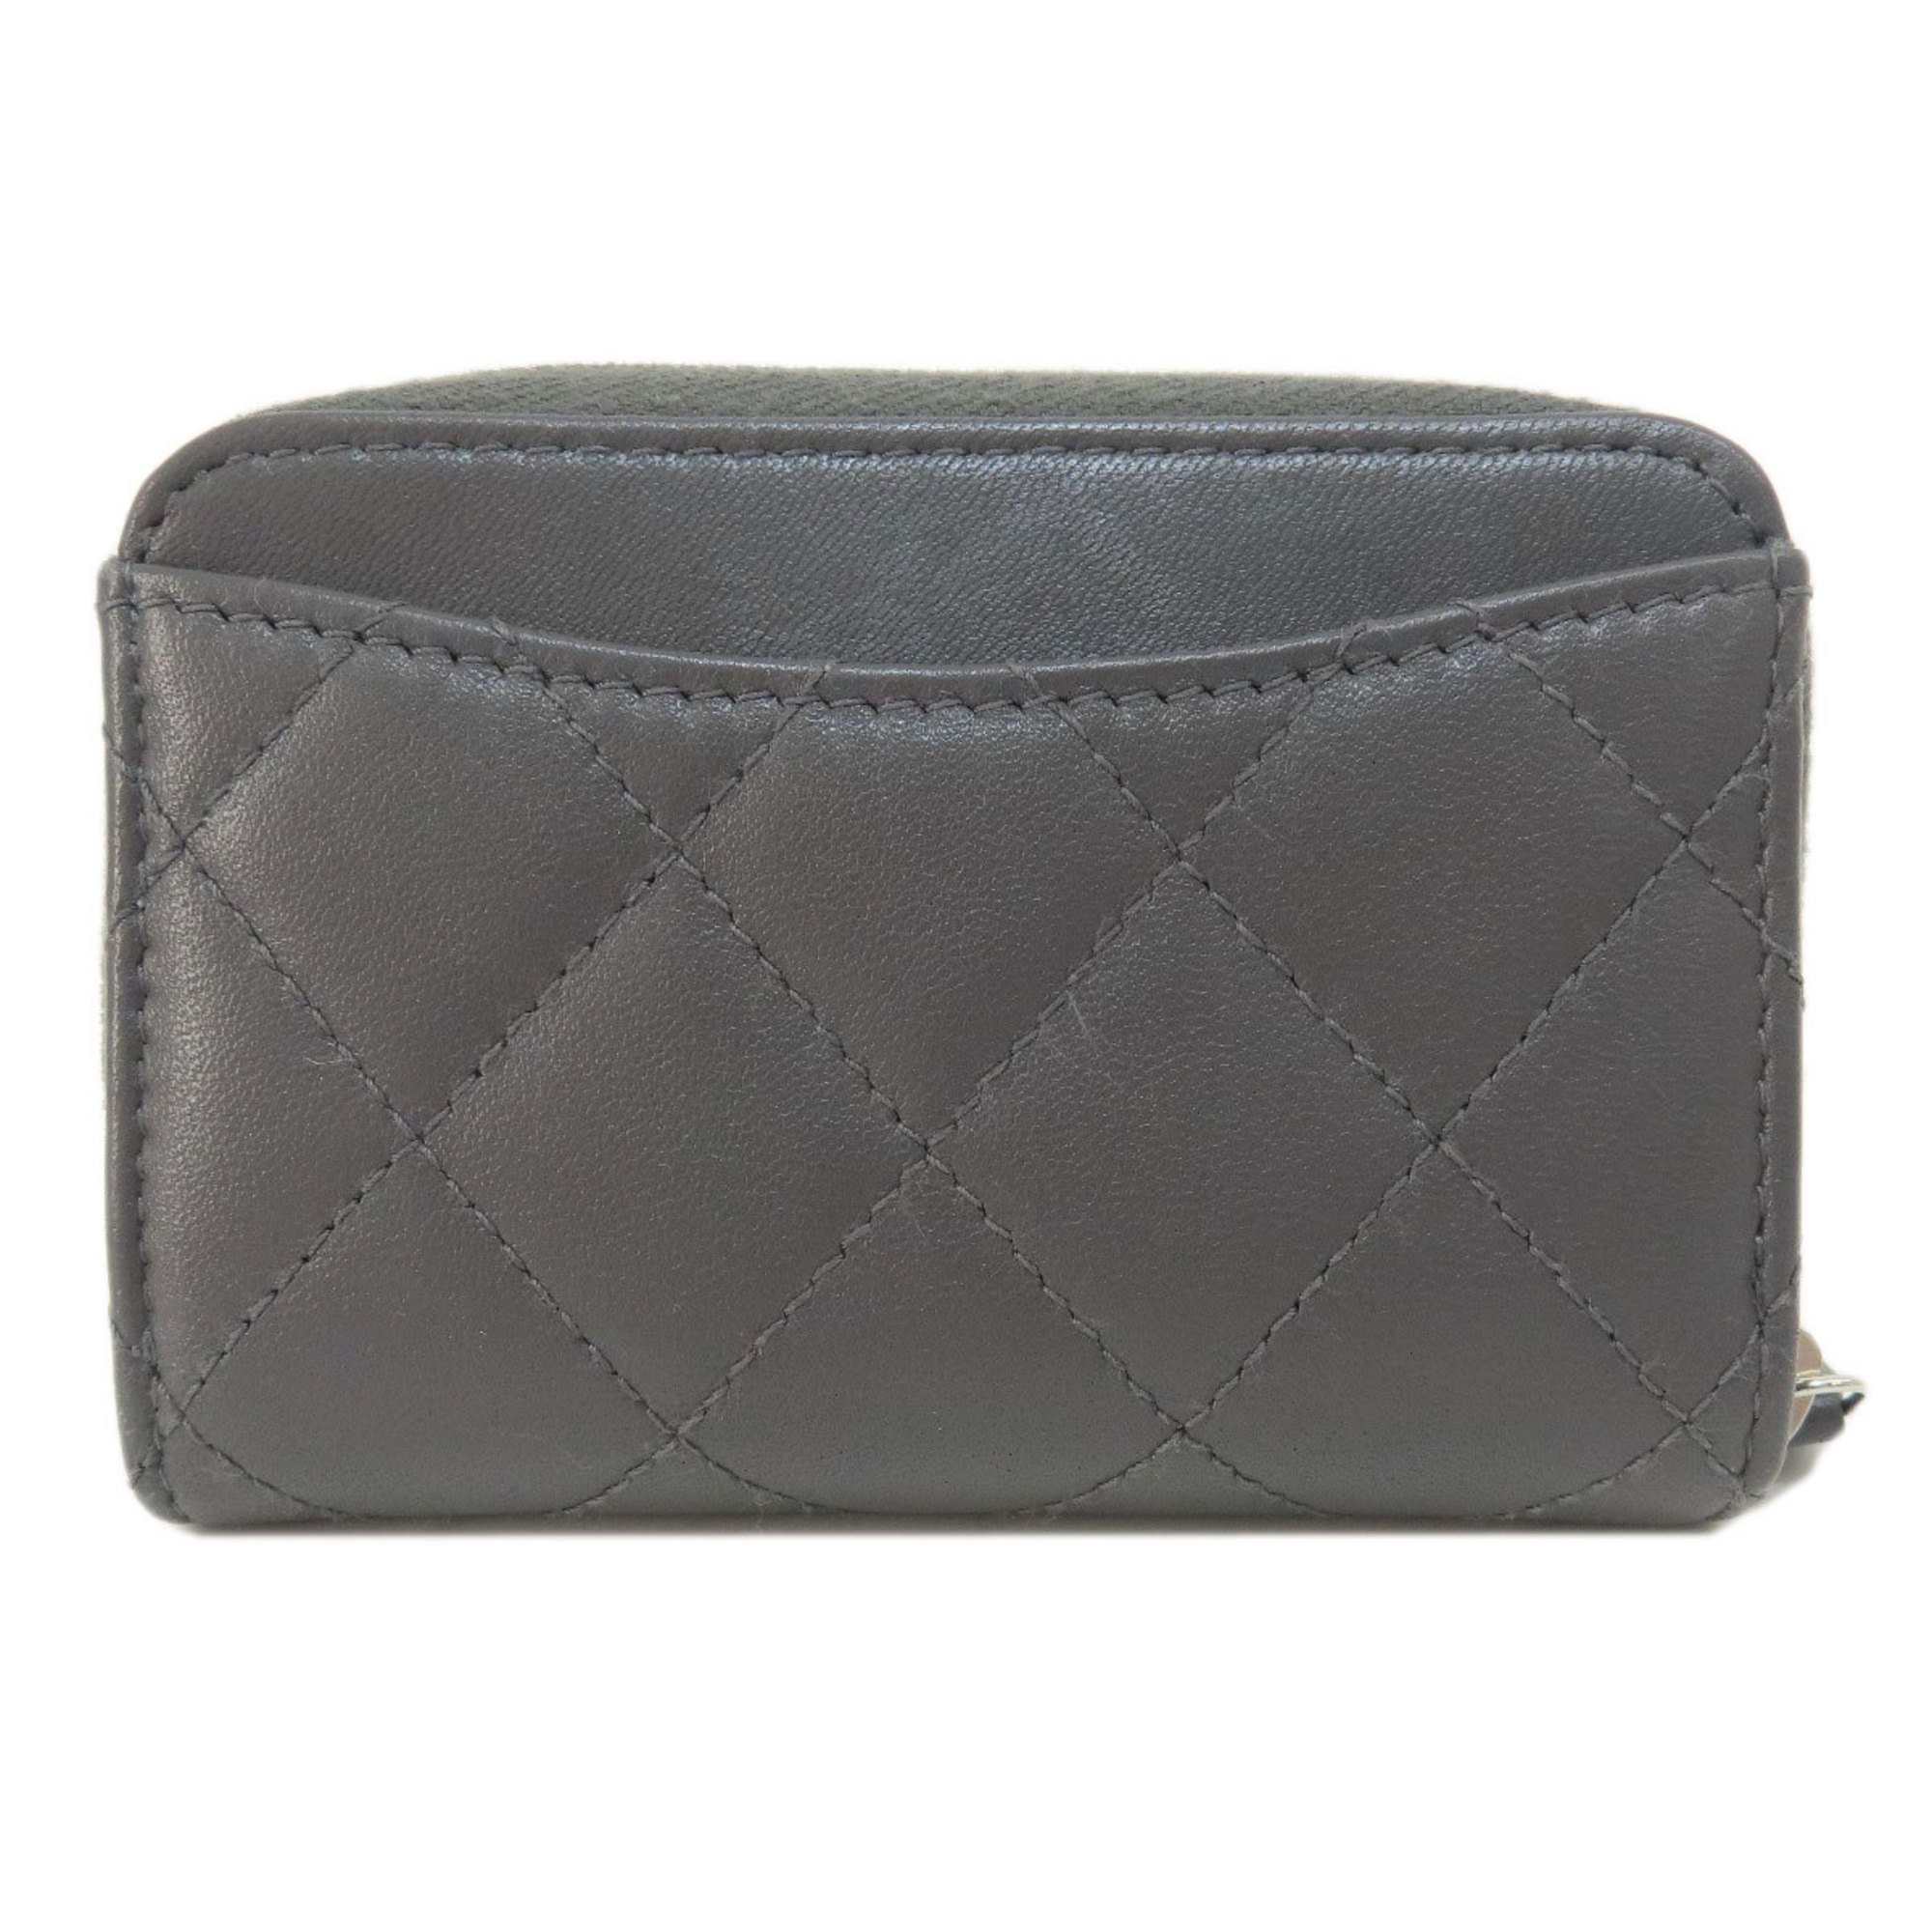 Chanel Matelasse Coco Mark Wallet/Coin Case Calf Leather Women's